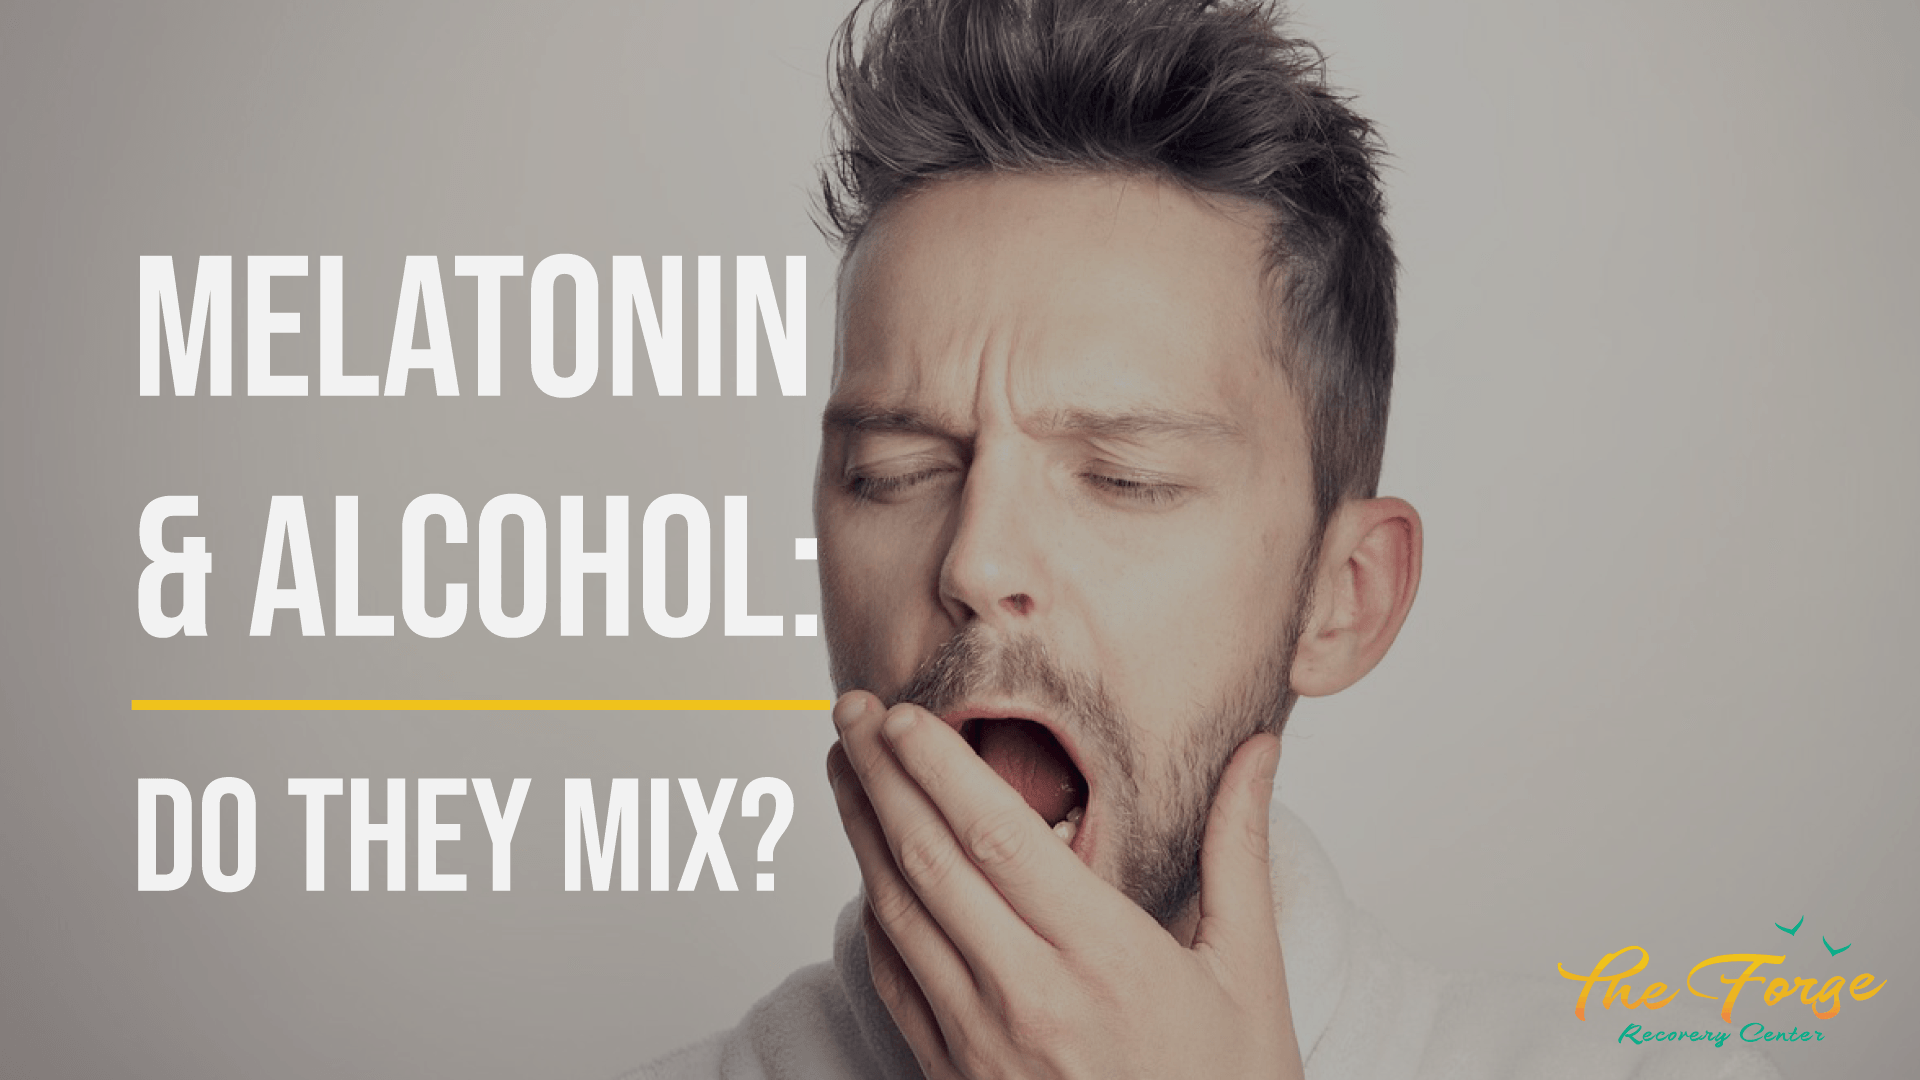 The Dangers of Mixing Melatonin and Alcohol